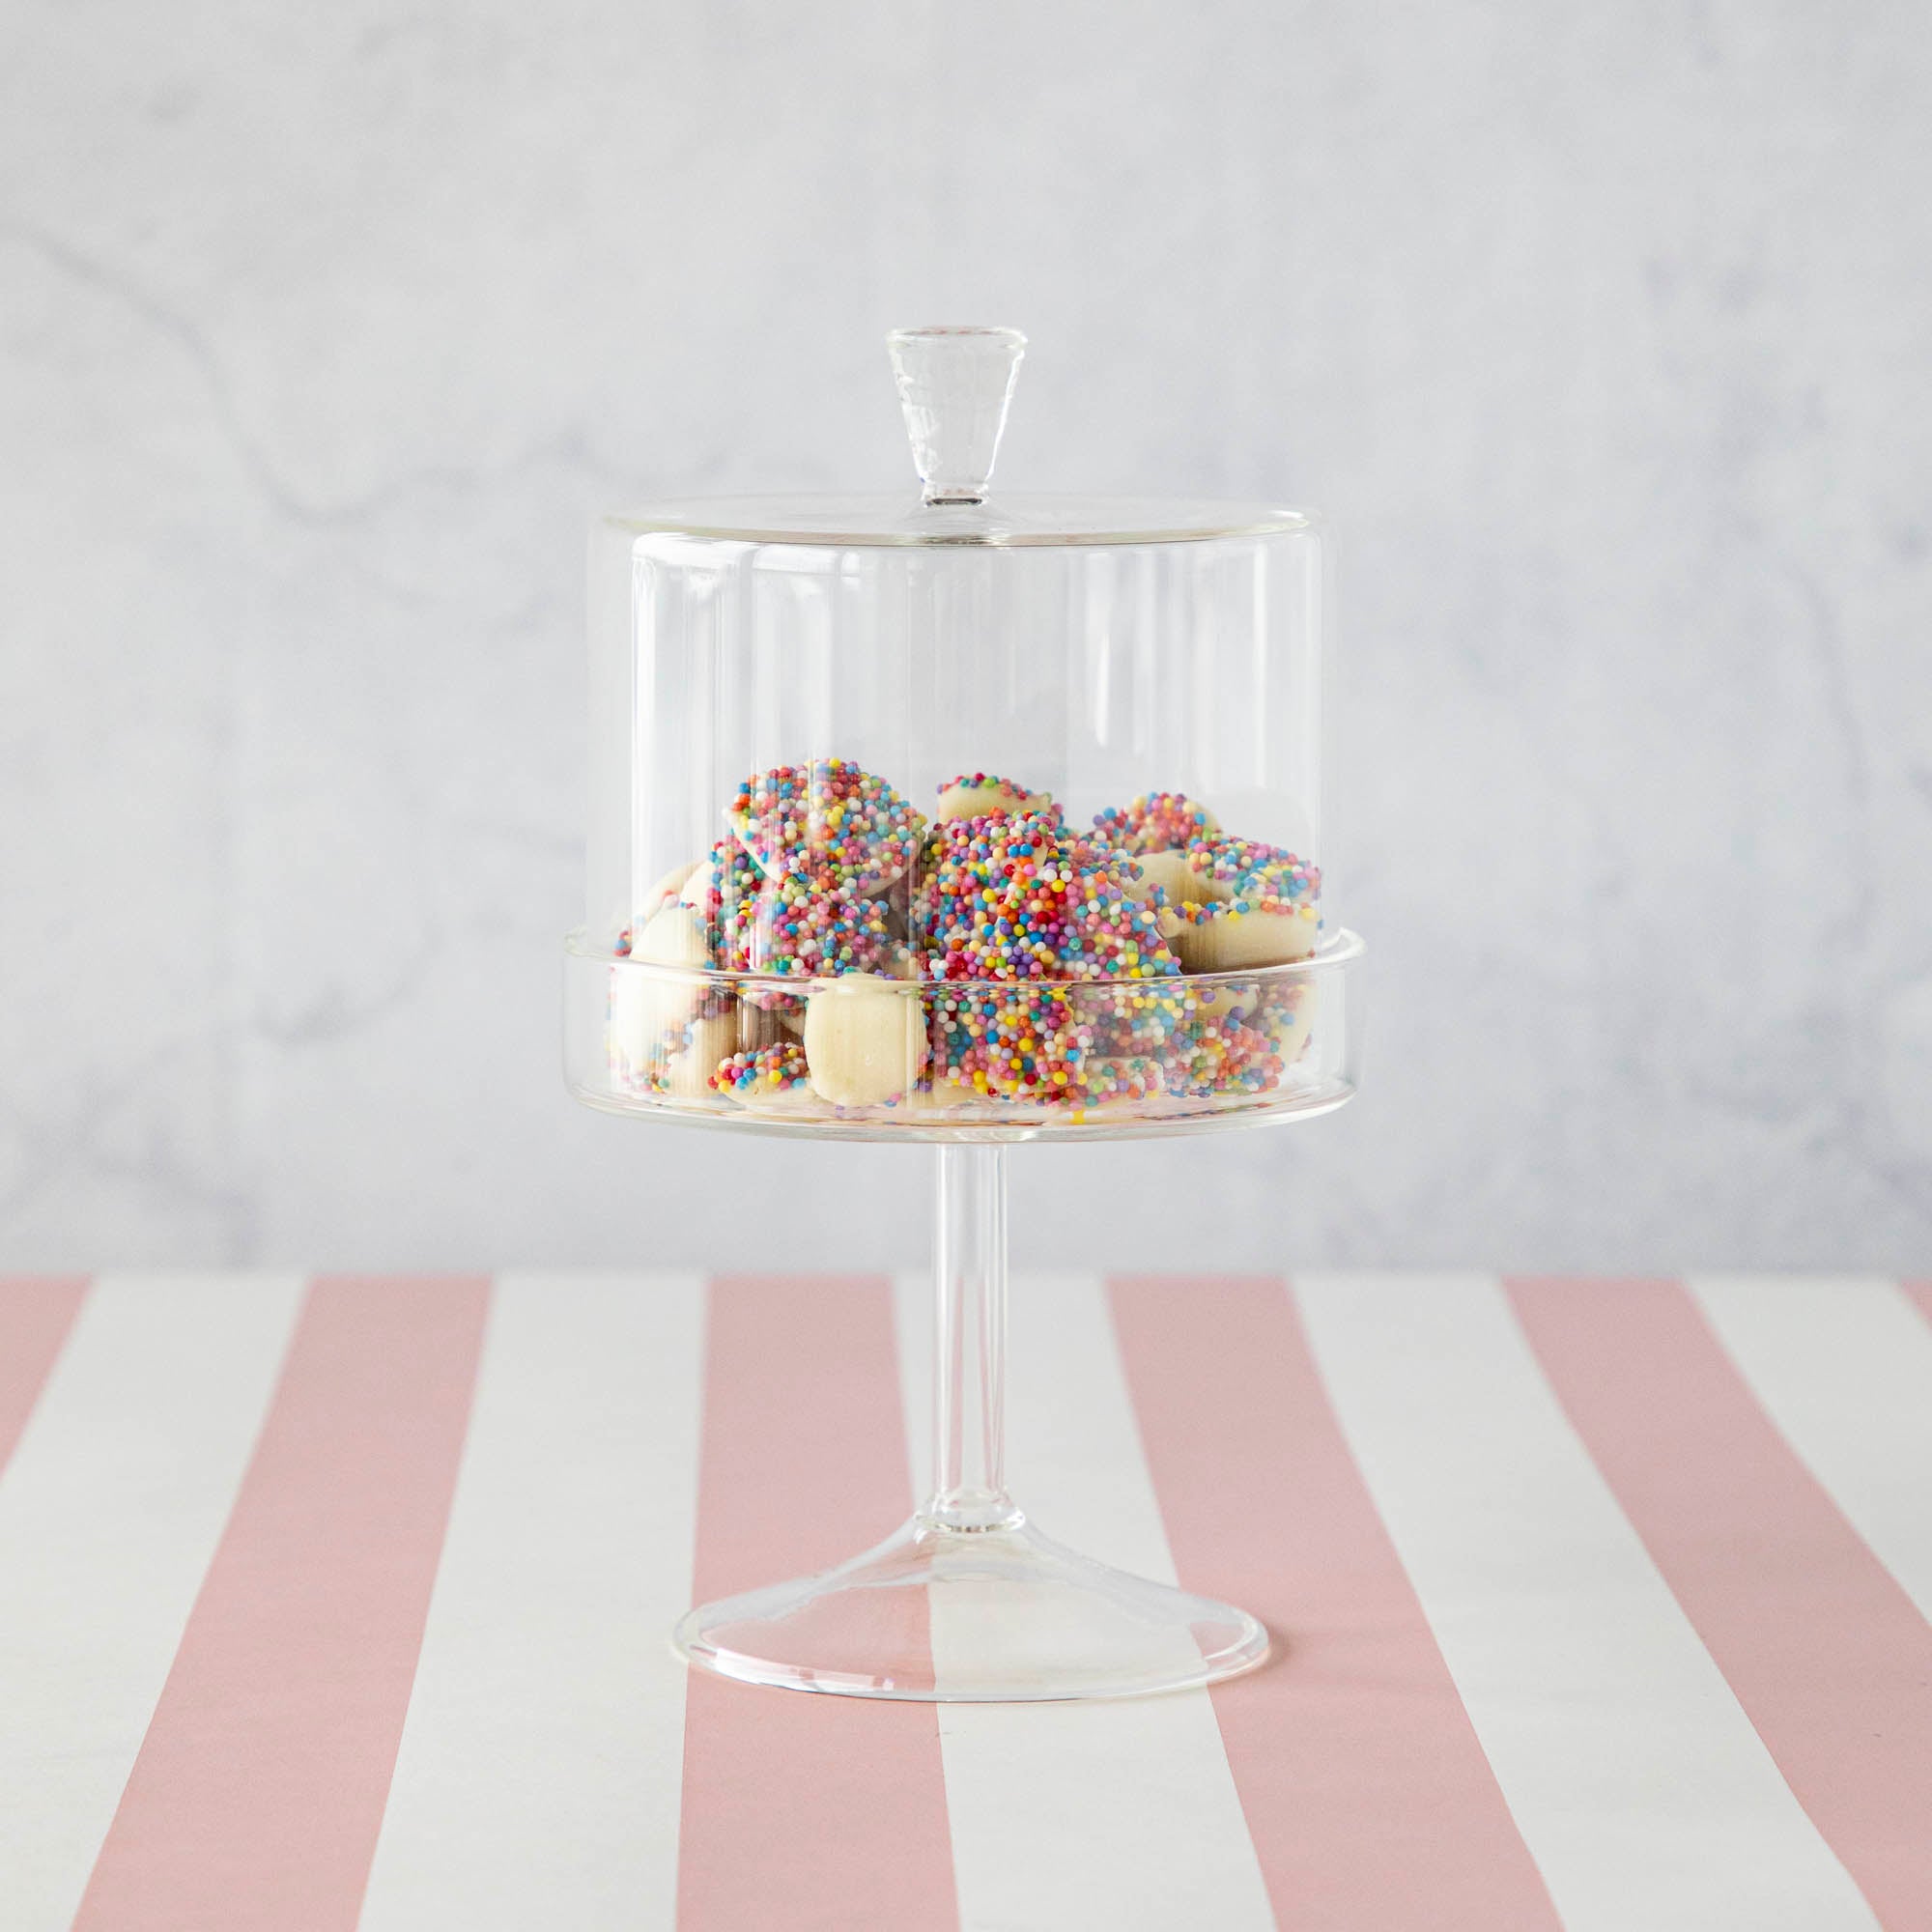 A HomArt Glass Dome &amp; Pedestal cake stand with a glass dome lid filled with sprinkle-covered cookies on a pink and white striped surface.